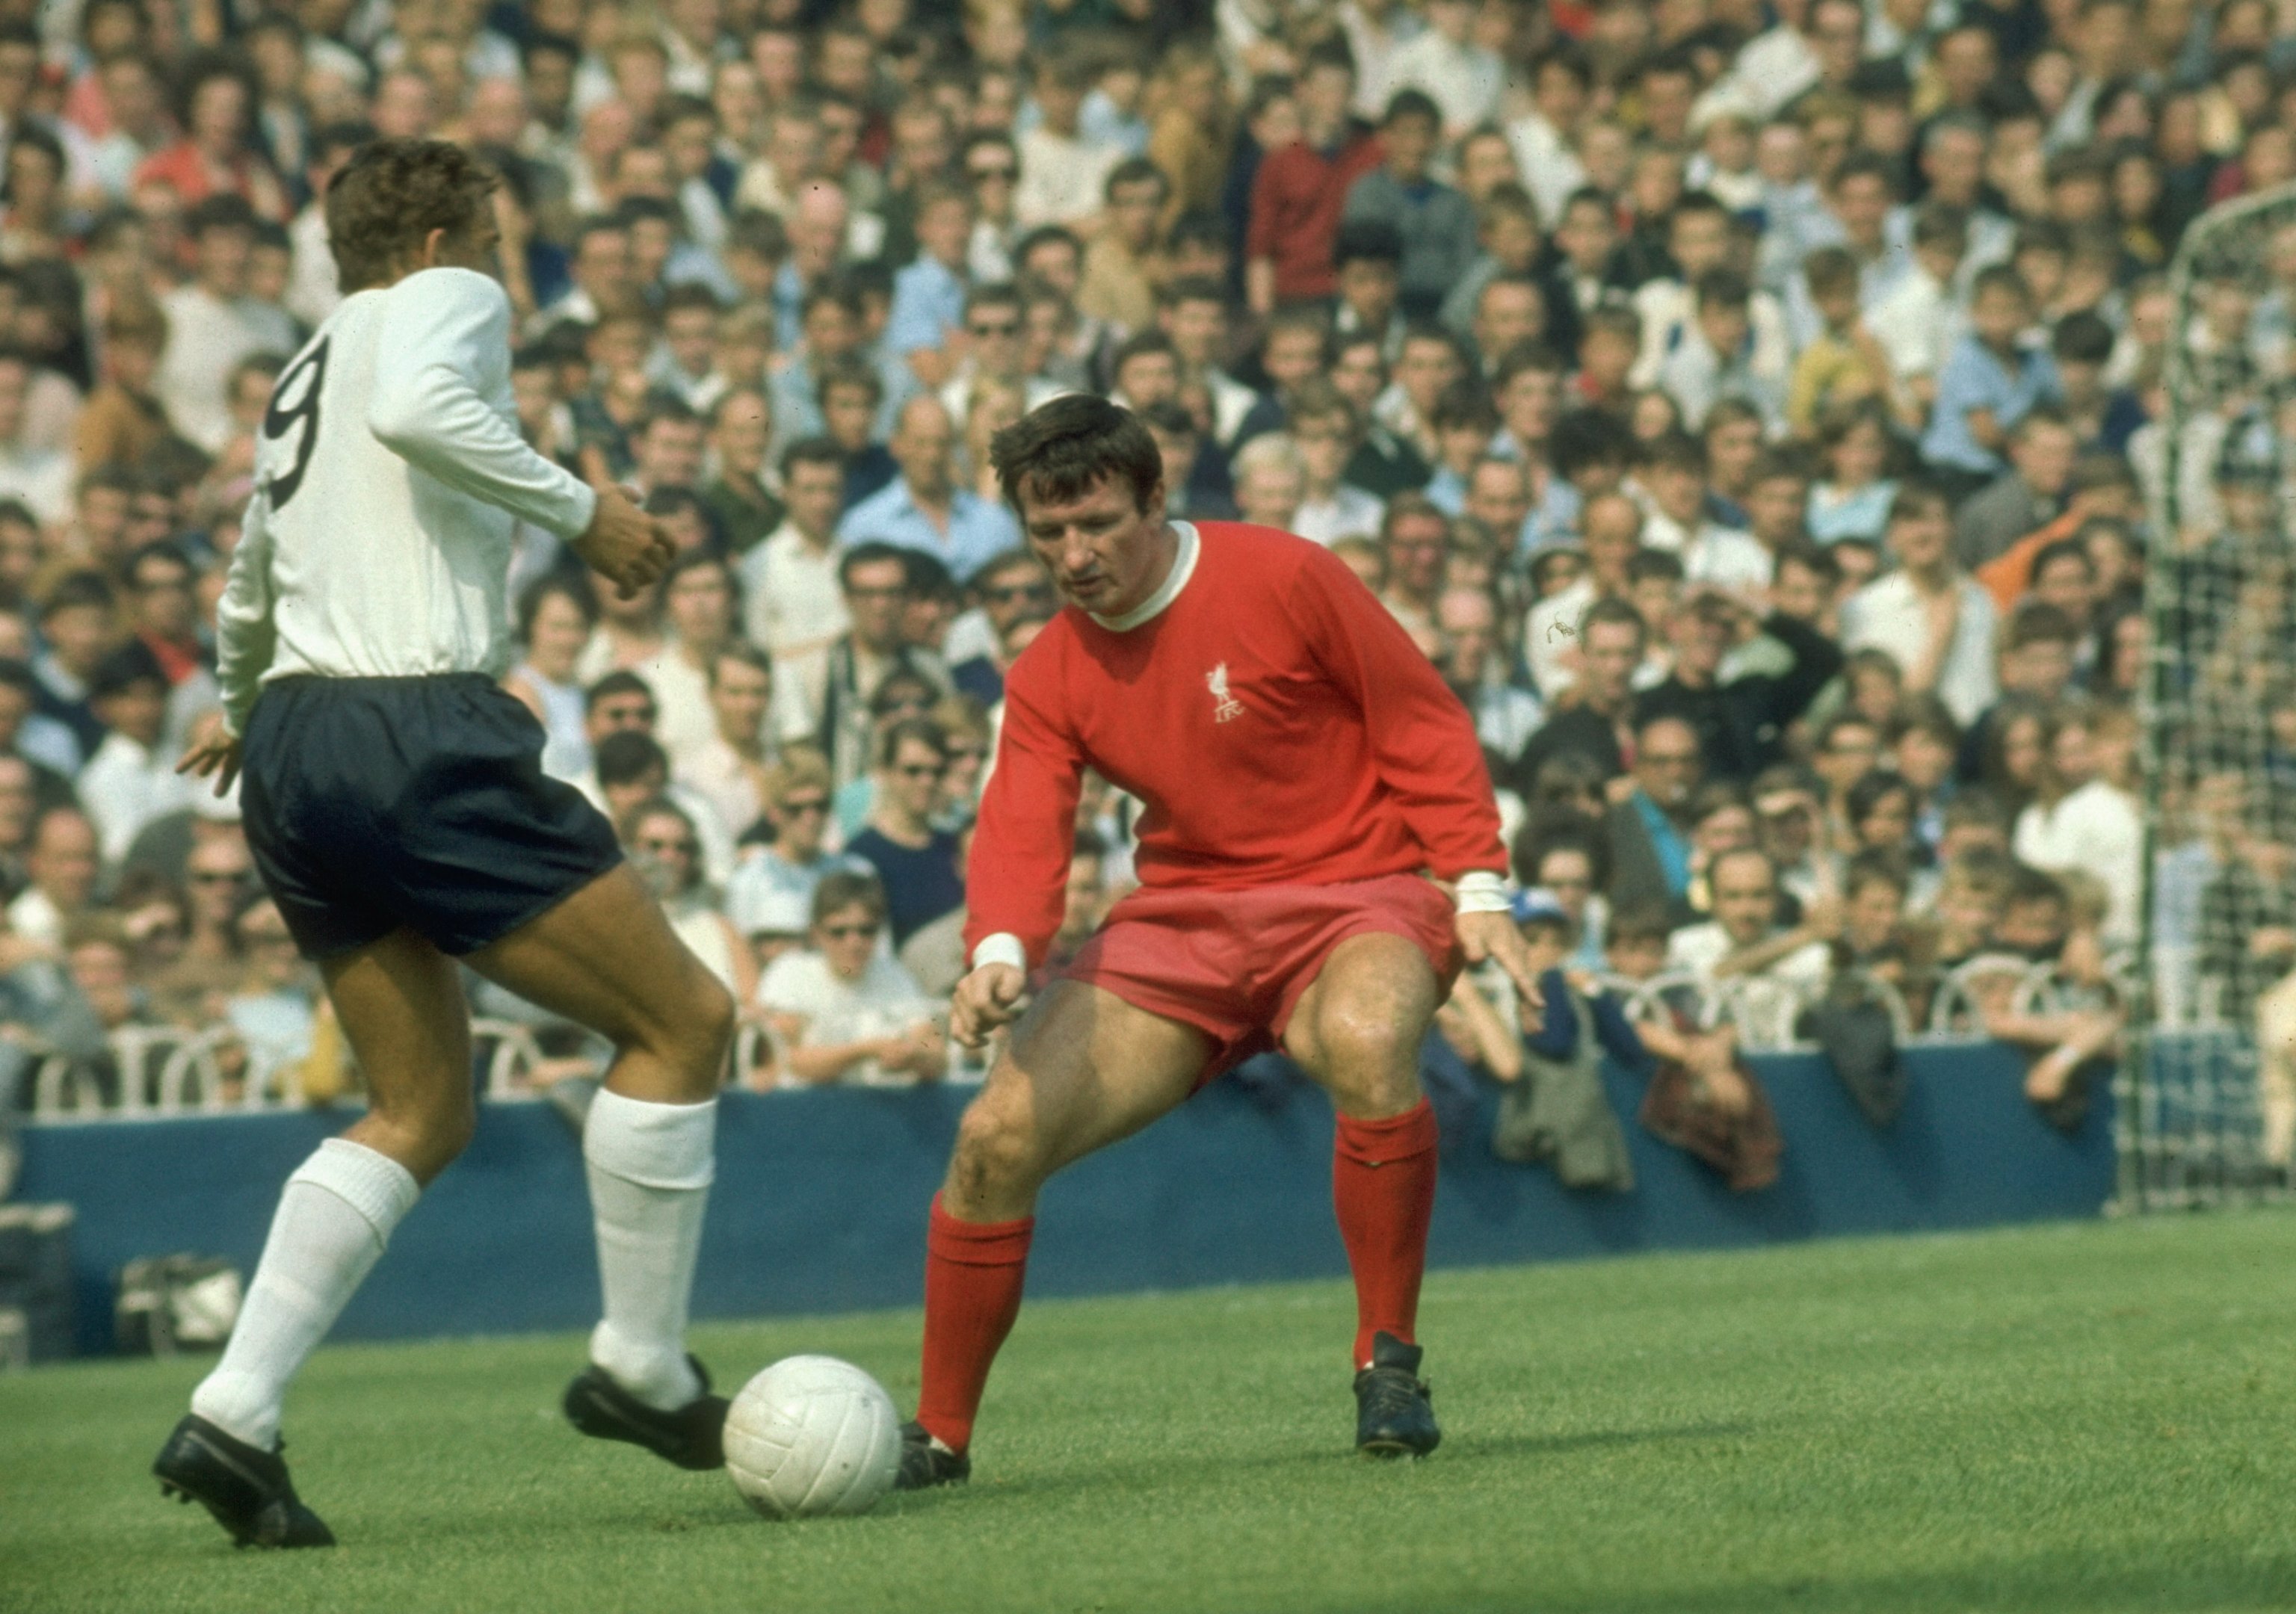 Undated:  Martin Chivers of Tottenham Hotspur takes on Tommy Smith of Liverpool during a match at Anfield in Liverpool, England. \ Mandatory Credit: Allsport UK /Allsport